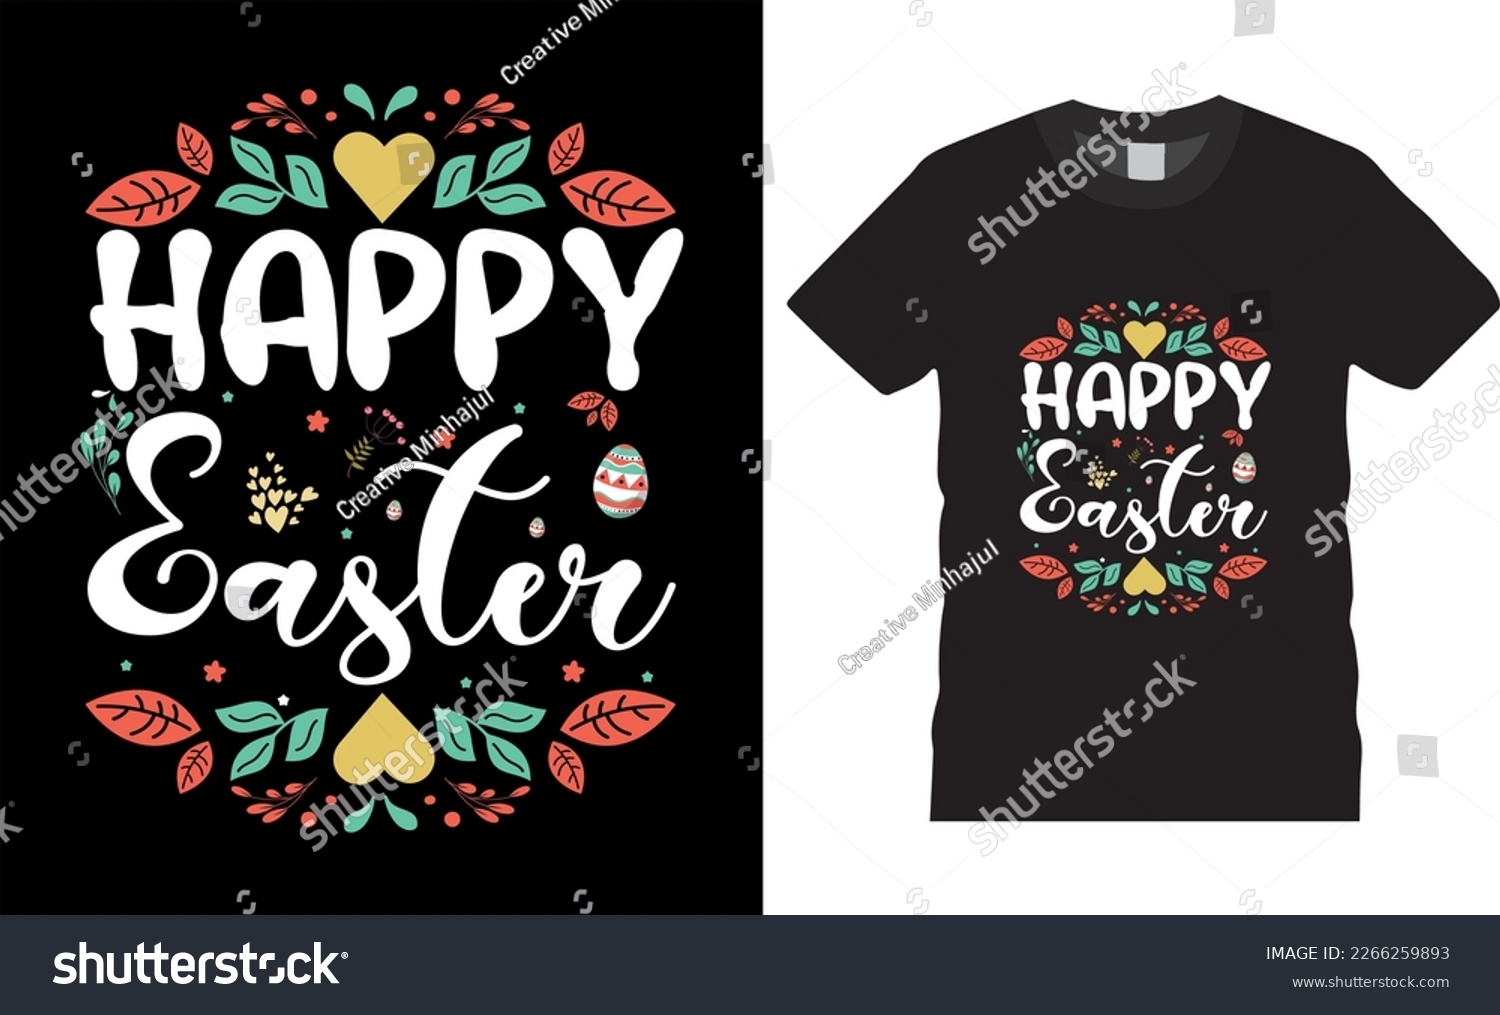 SVG of Happy easter rabbit, bunny tshirt vector design template. Happy easter t-shirt design.Ready to print for apparel, poster, mug and greeting plate illustration. svg